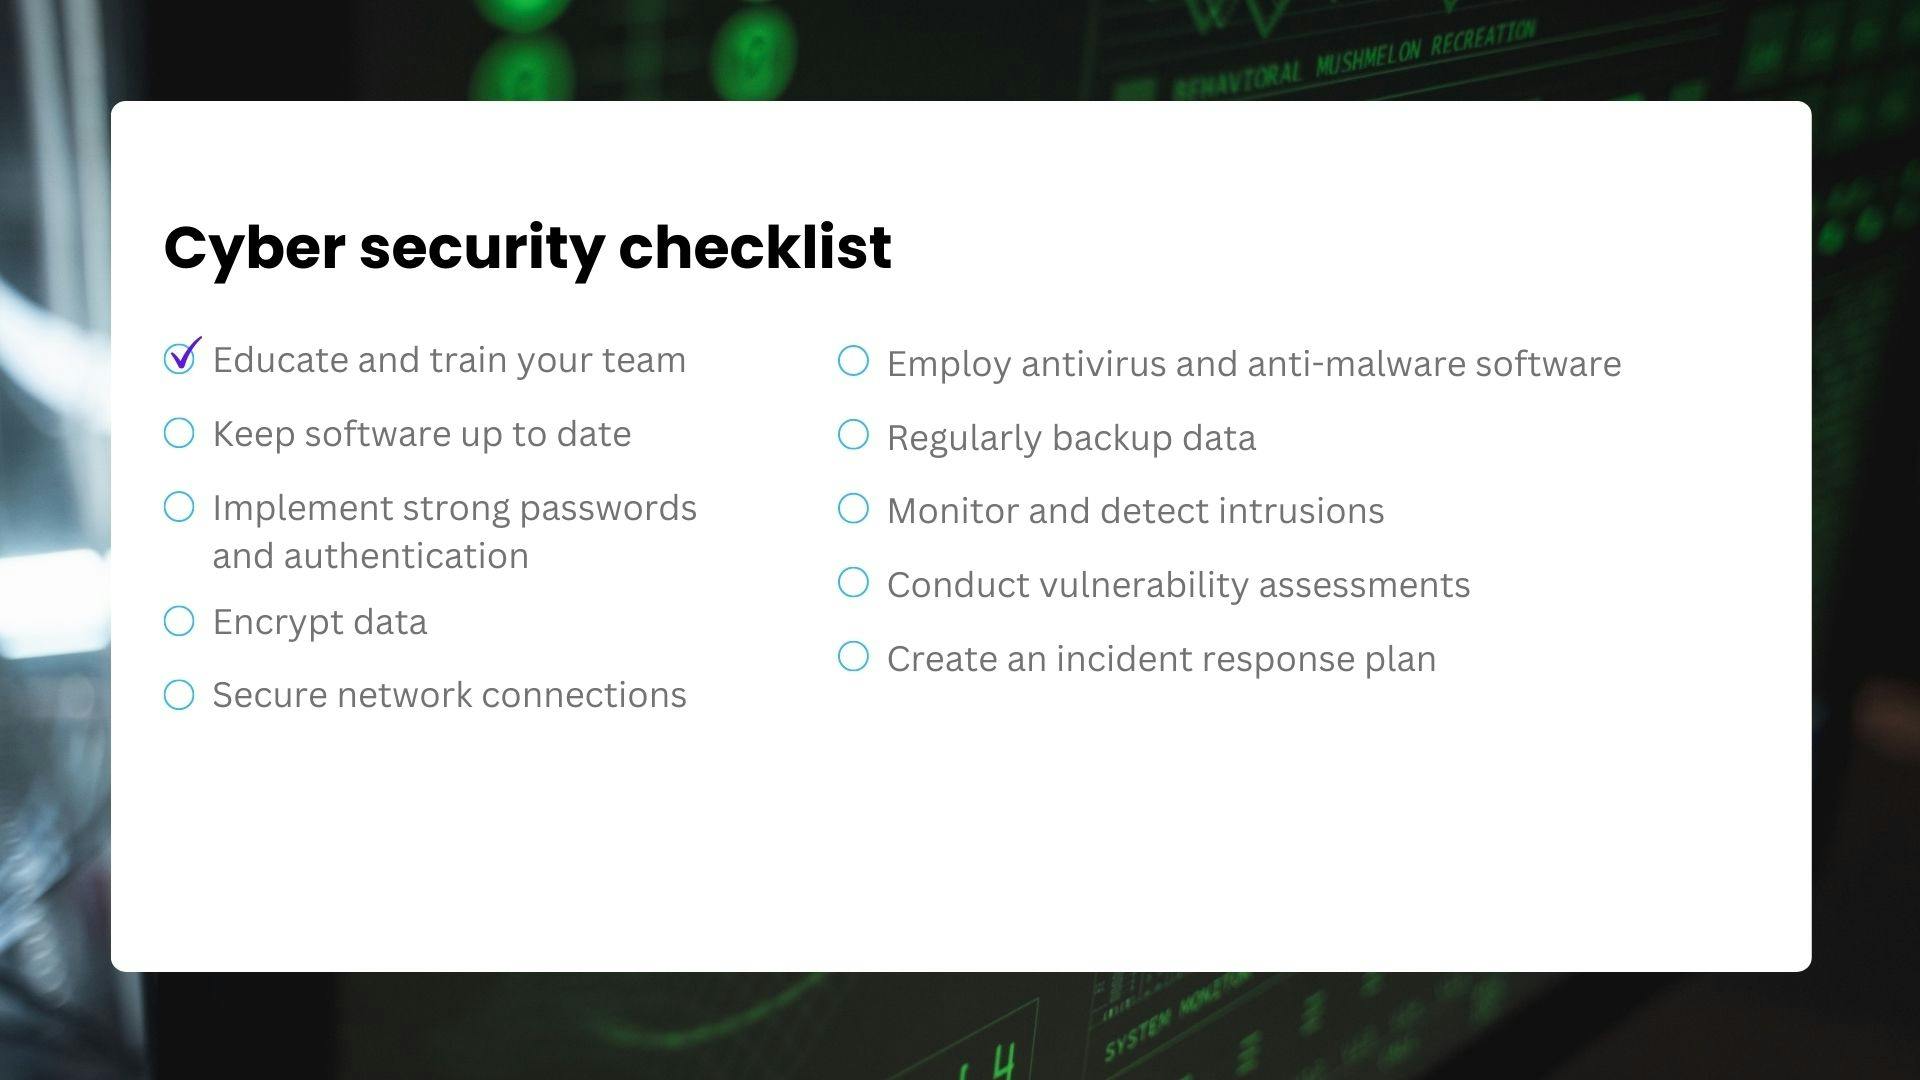 Cyber security checklist - overview